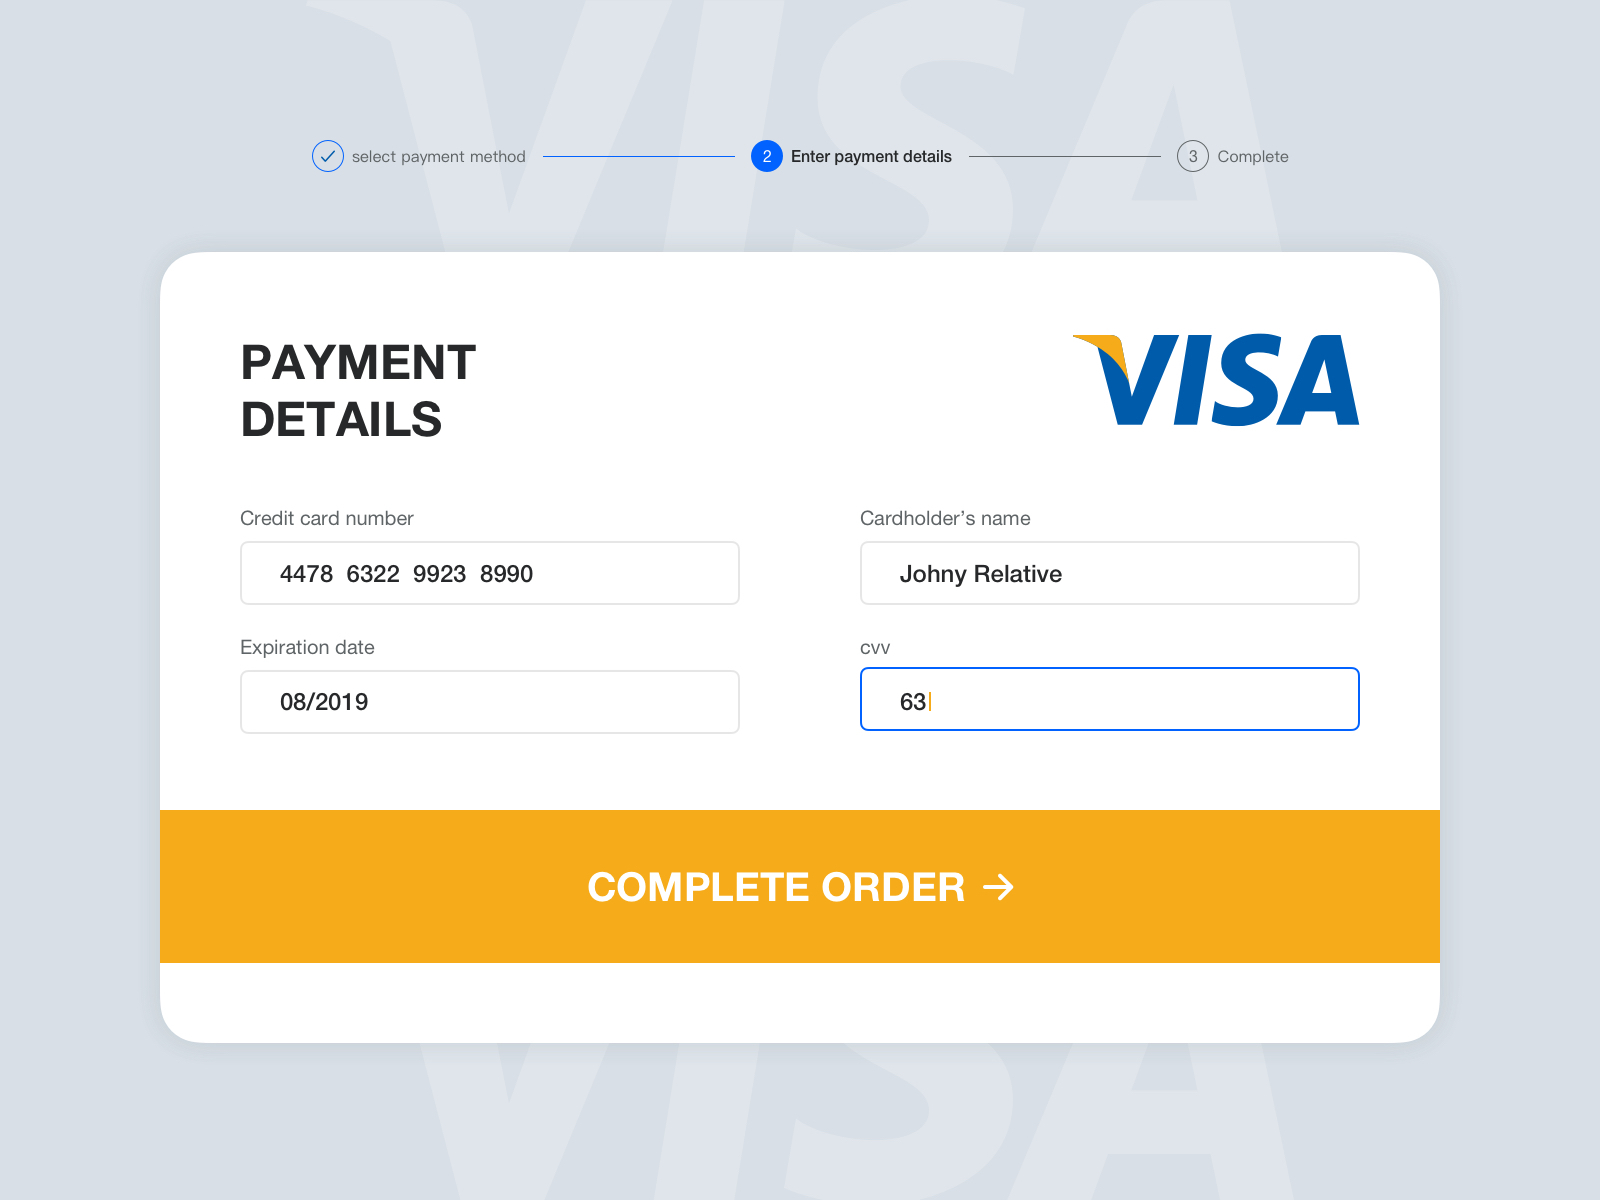 Pay by card. Пеймент карт. Payment by Card. Pay me карты. Visa (CARDPAY)..